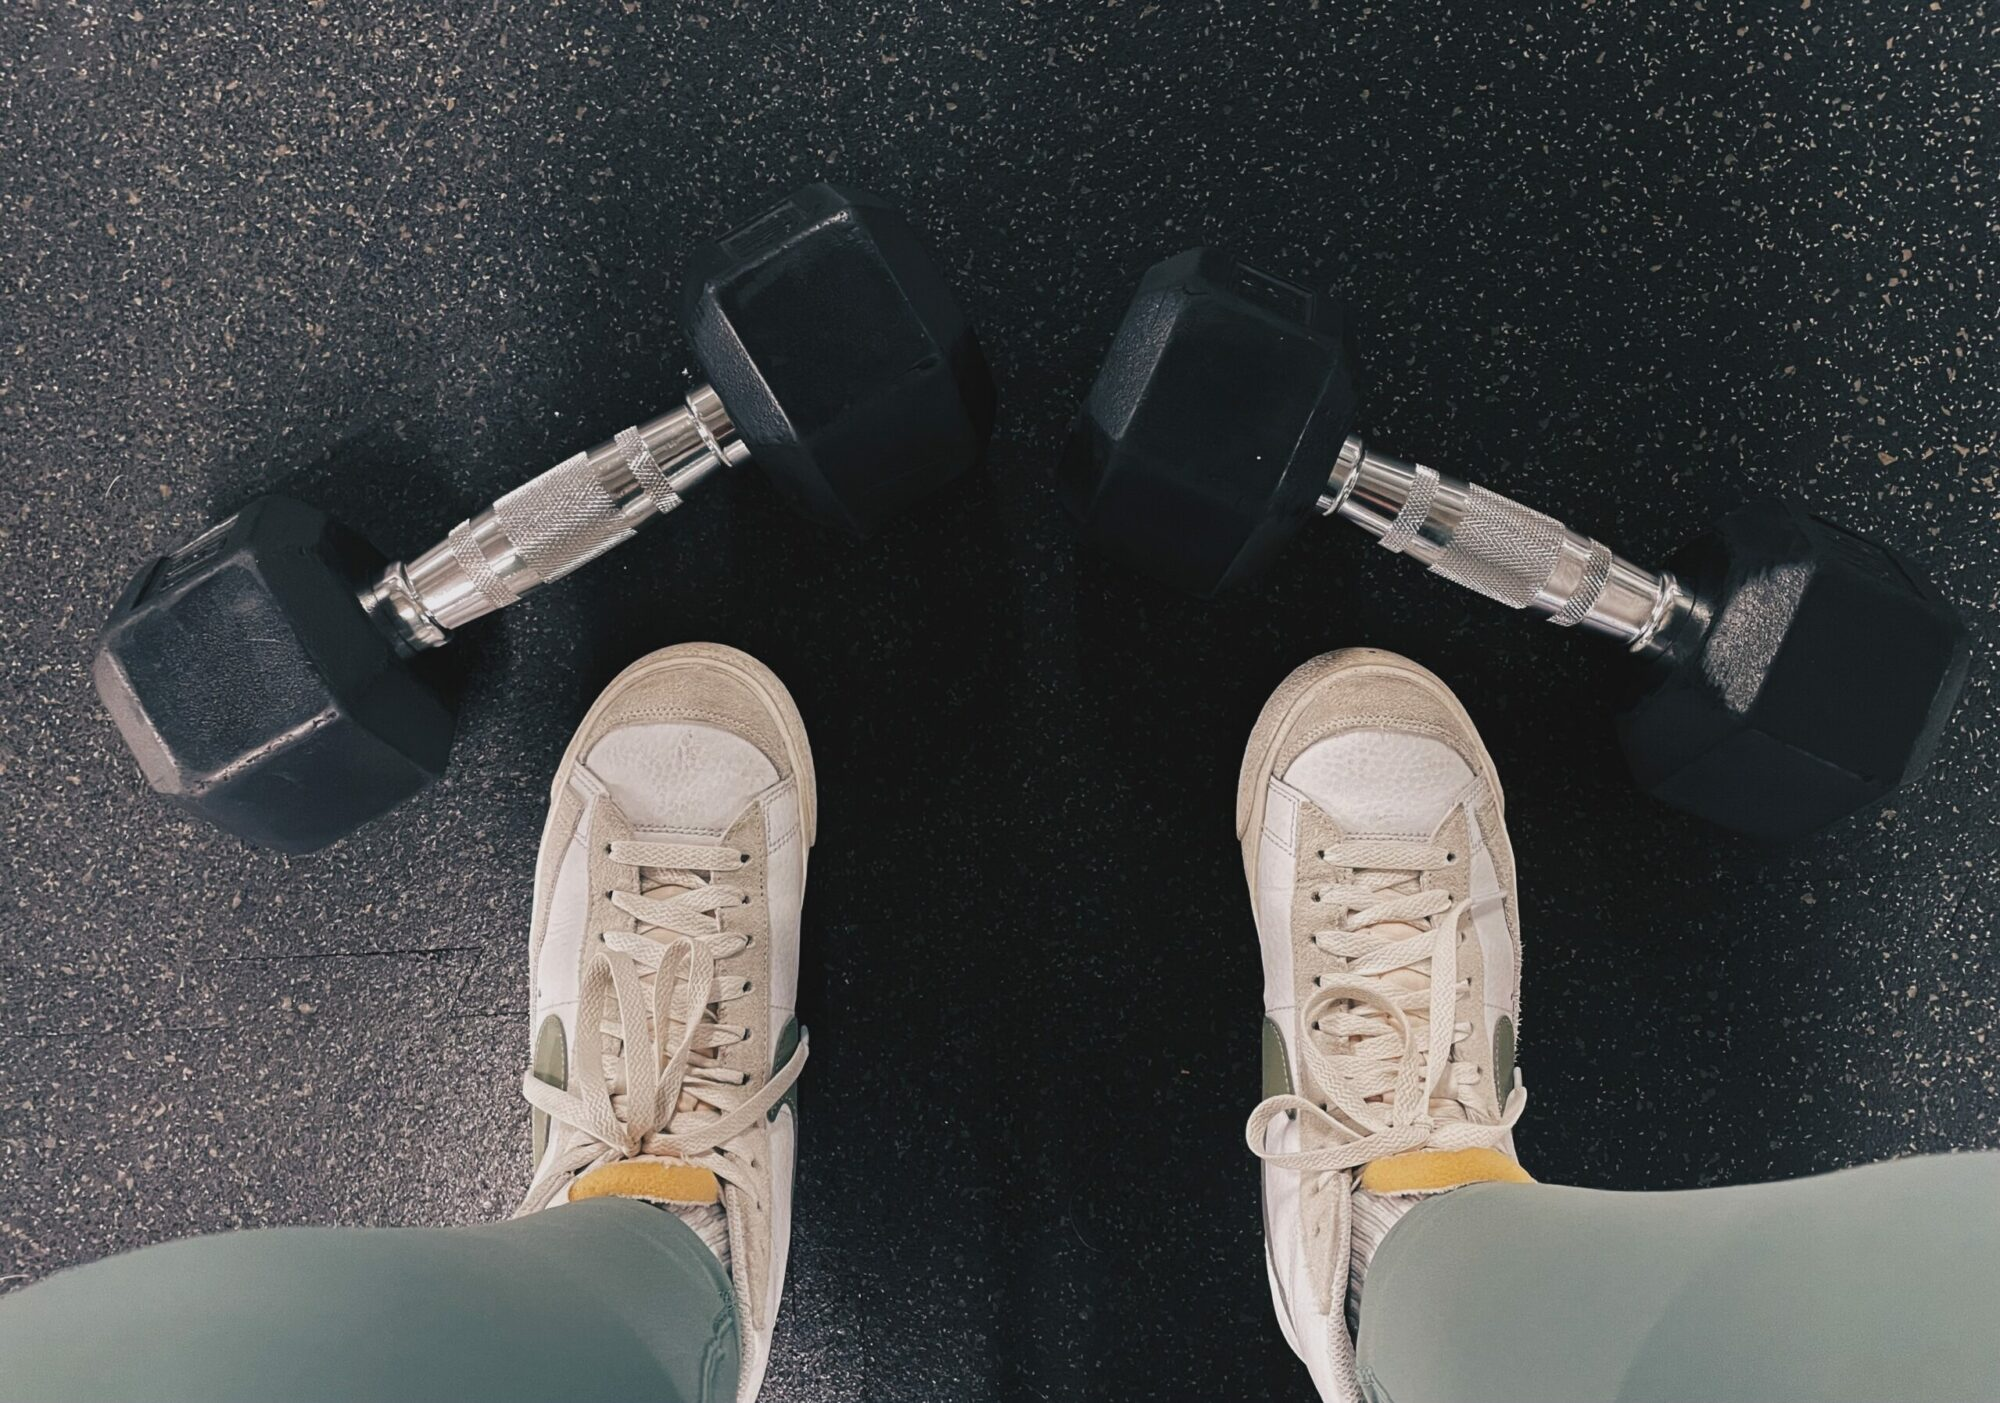 An image showing two feet with dumbbells next to them. The banner image of my peer's blog - Fueling Your Twenties: A Guide to Fitness and Nutrition.